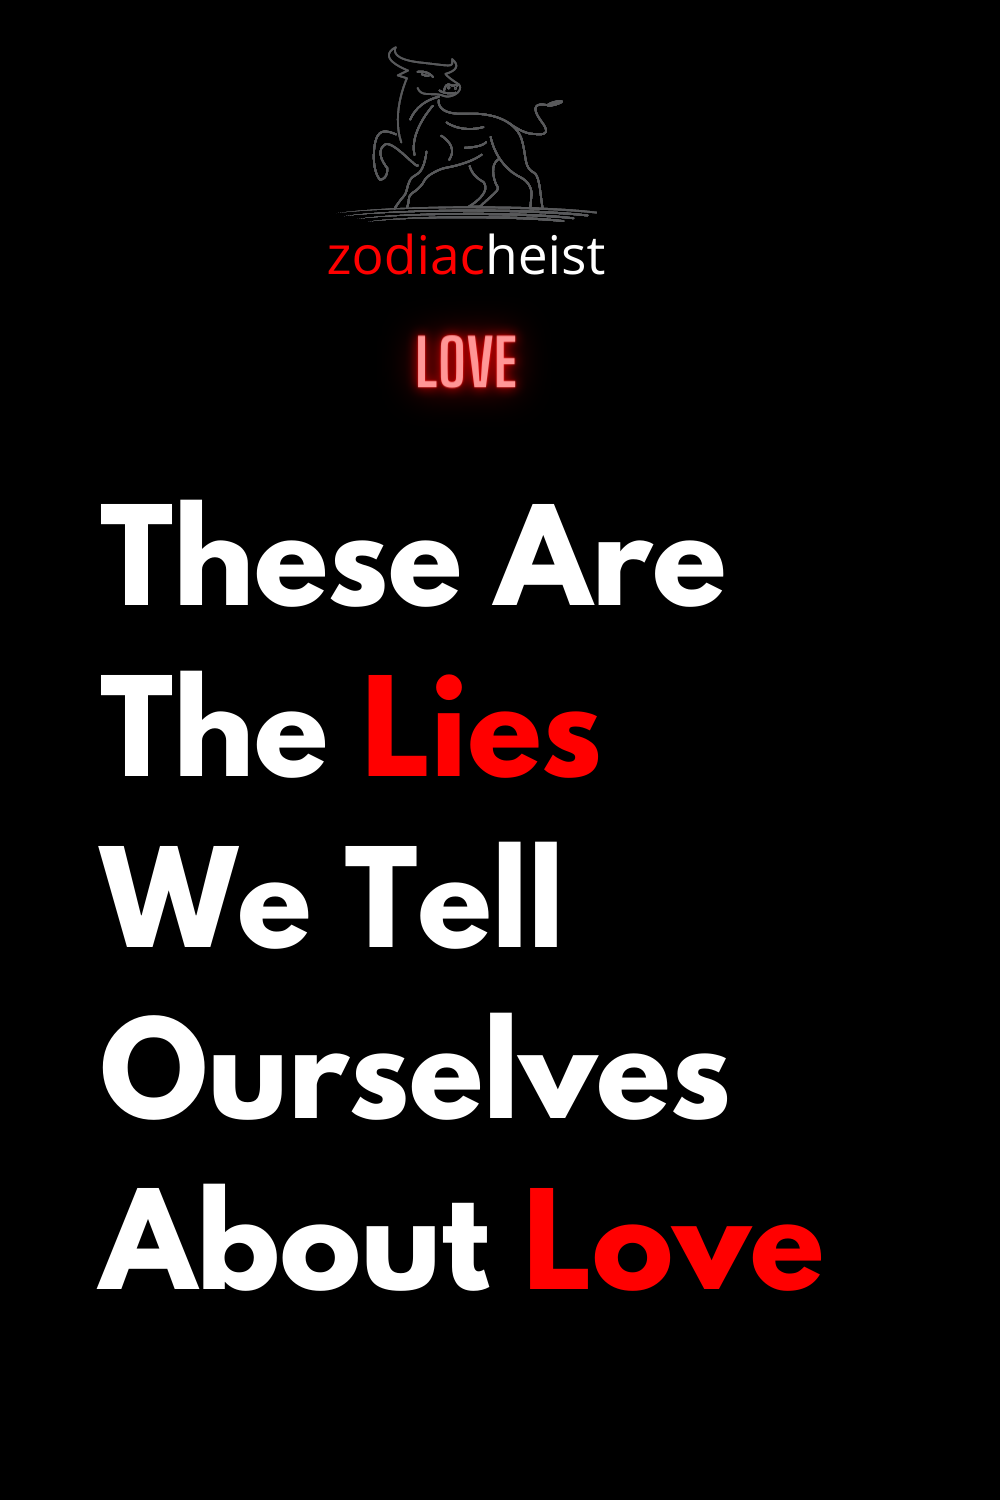 These Are The Lies We Tell Ourselves About Love